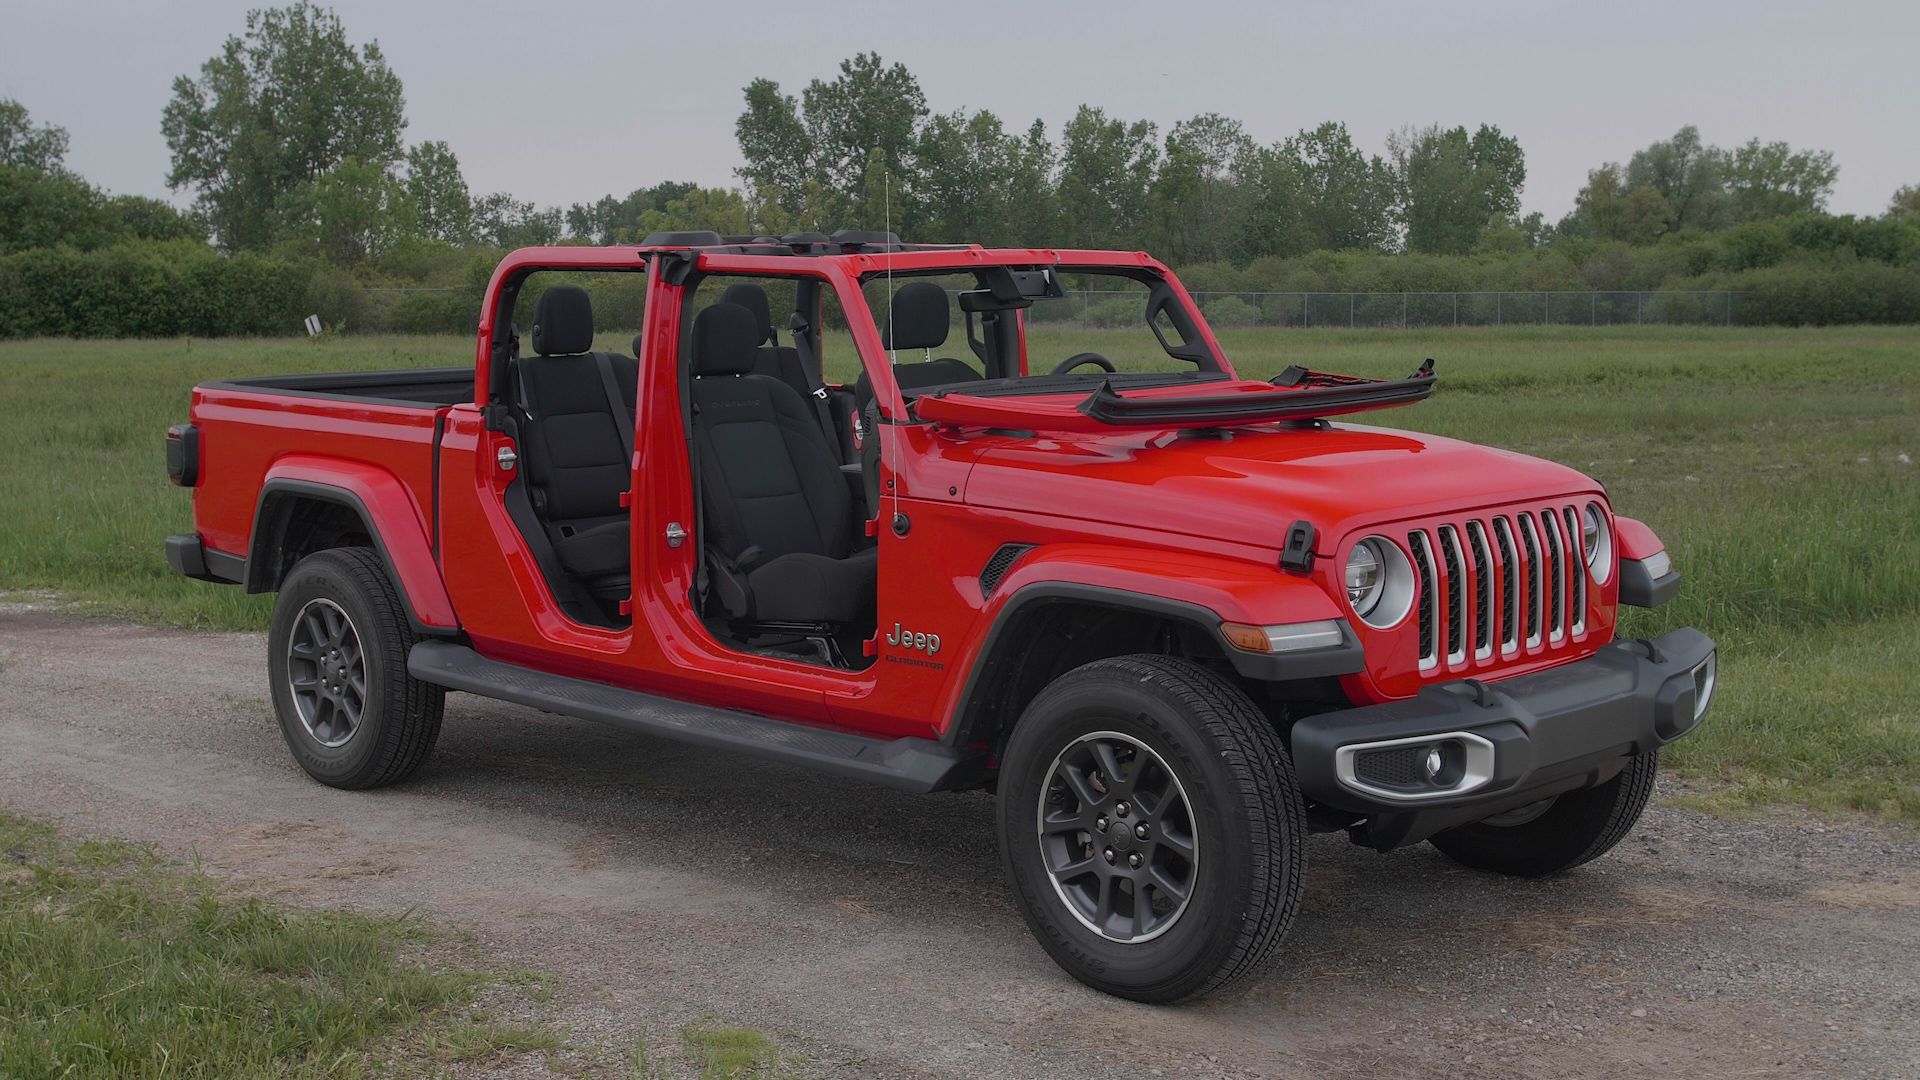 How to Remove the 2020 Jeep Gladiator's Doors, Roof, and Windshield